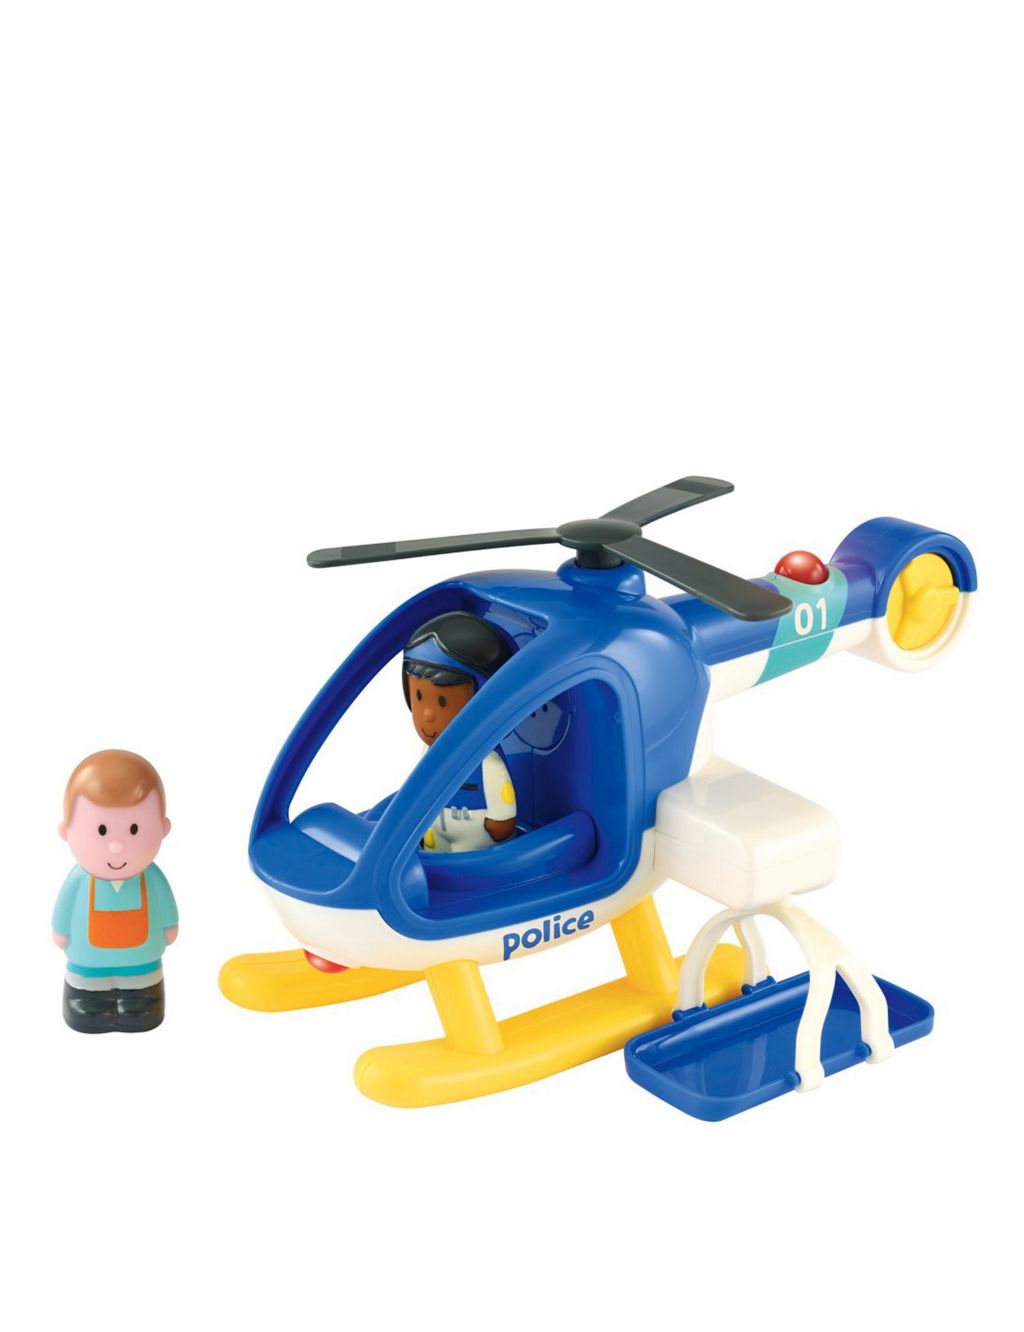 Happyland Lights & Sounds Police Helicopter (18 Mths-5 Yrs) image 1